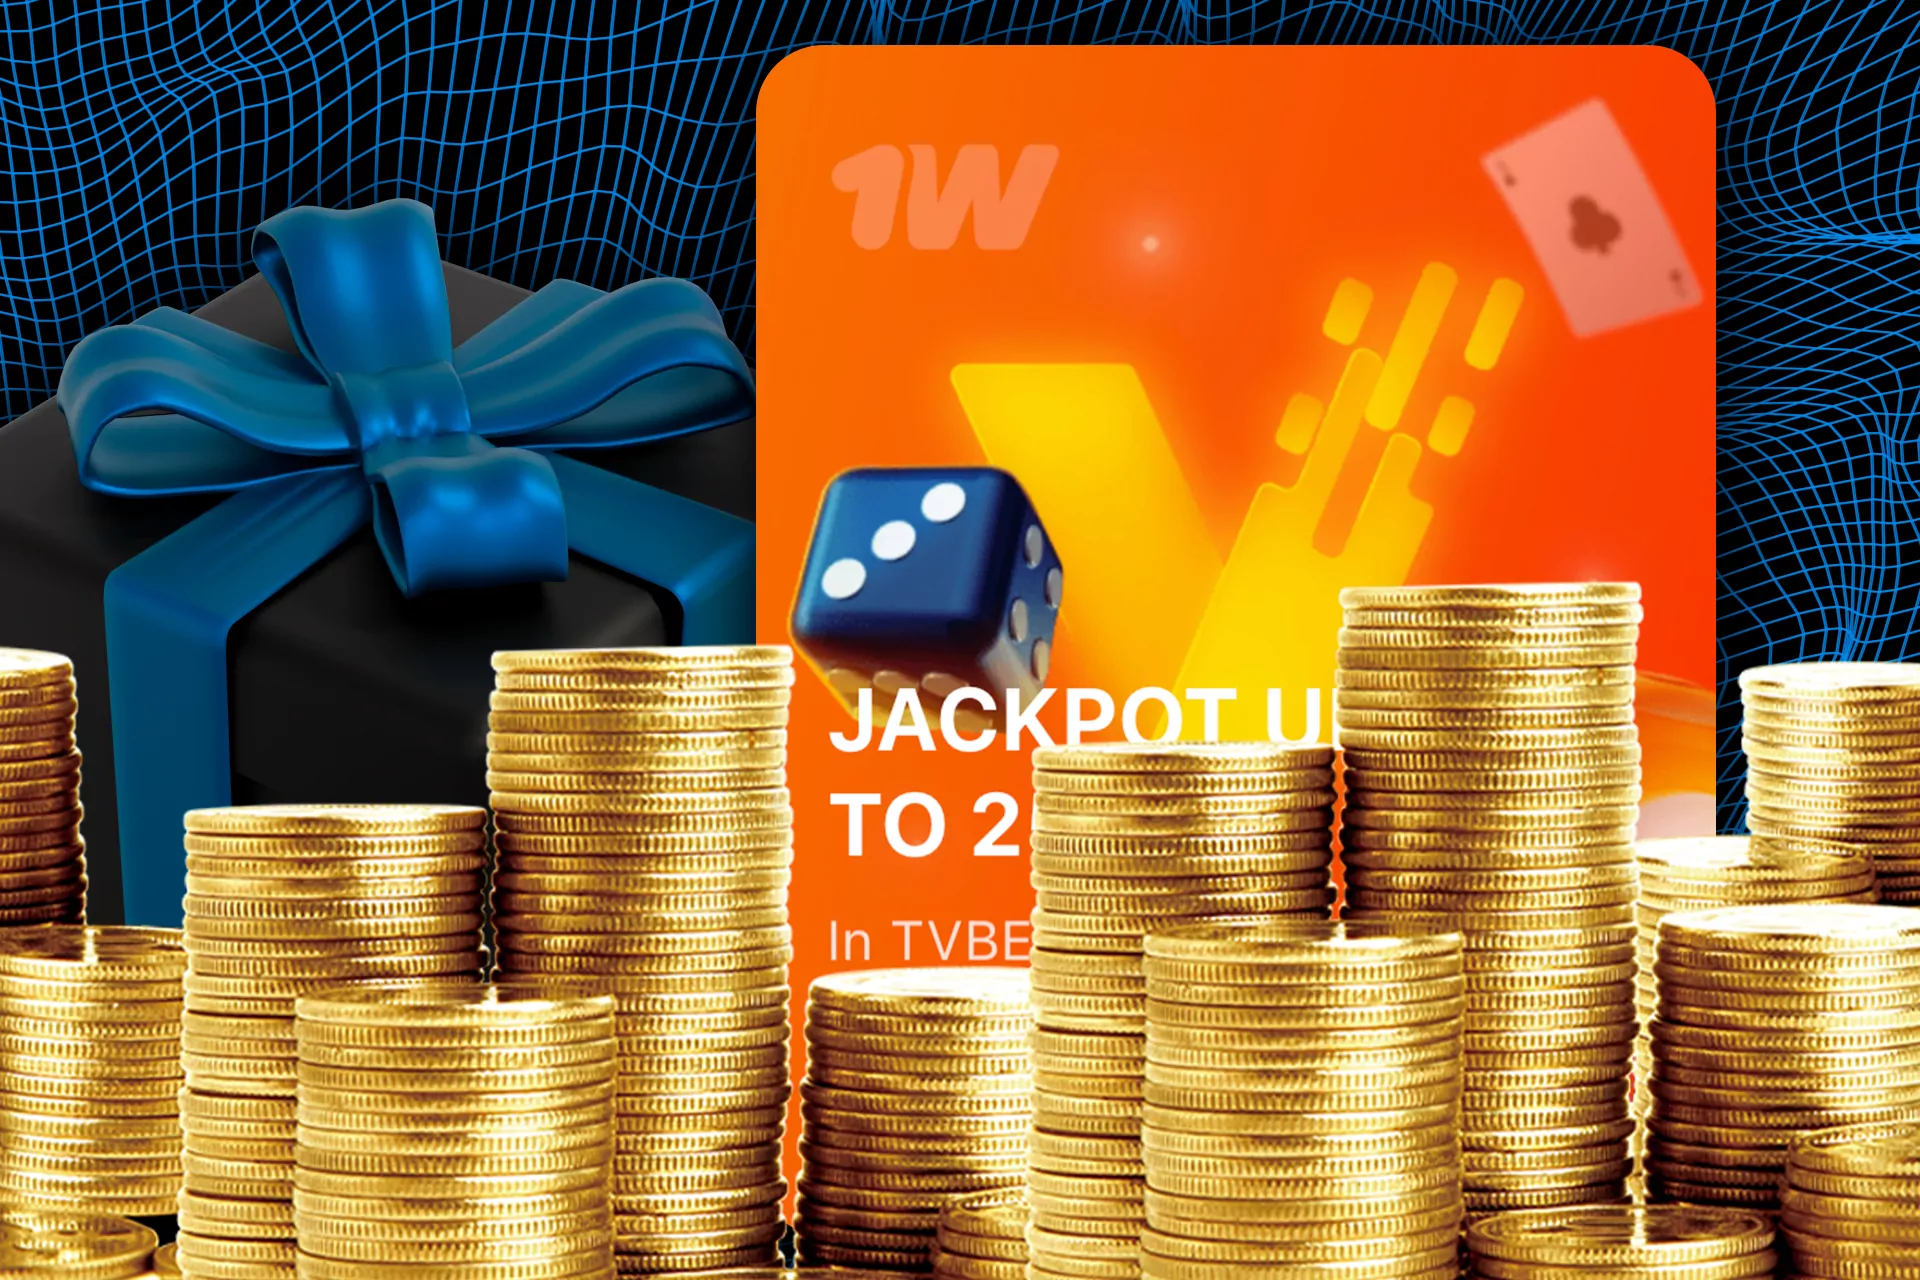 The TVBET prize fund has three types of jackpots you can get.